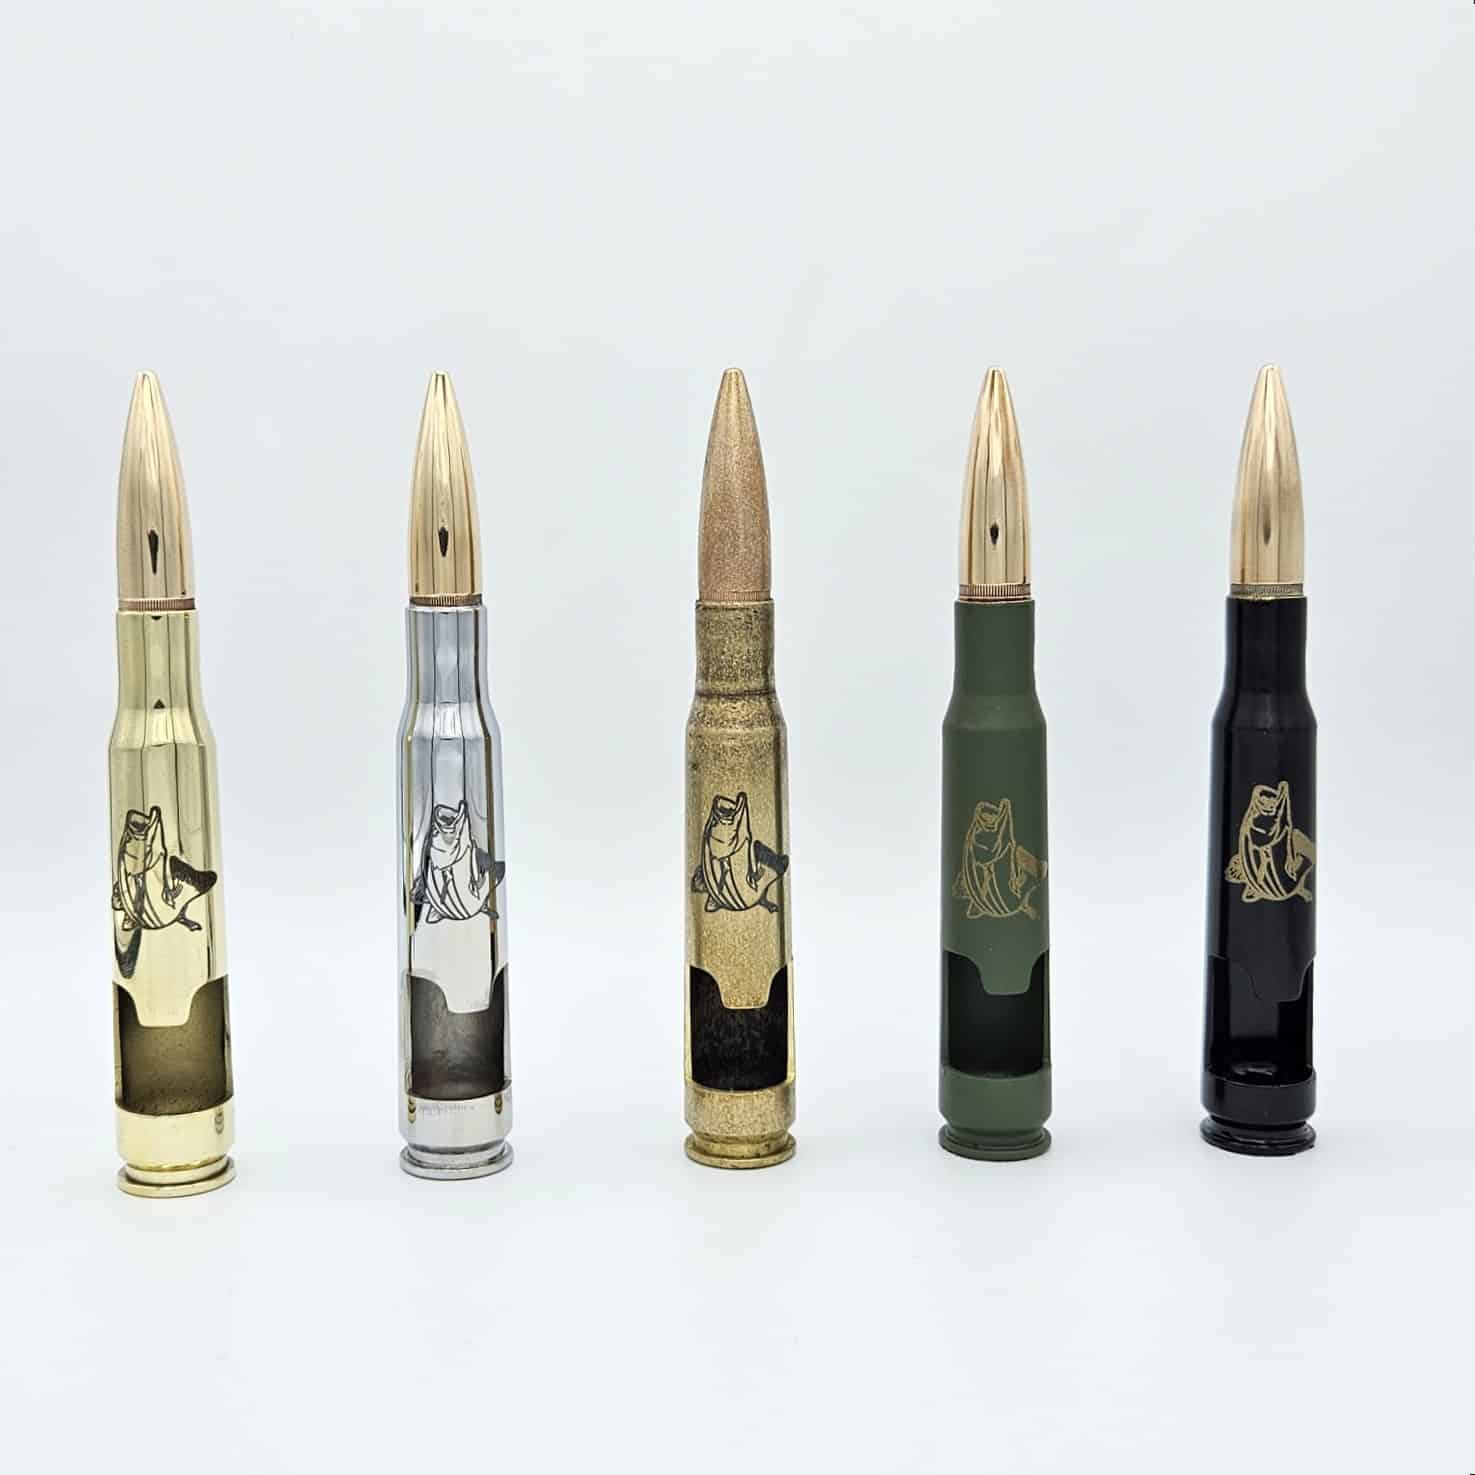 Bass Fish .50 caliber Bullet Bottle Opener, five finishes to choose from